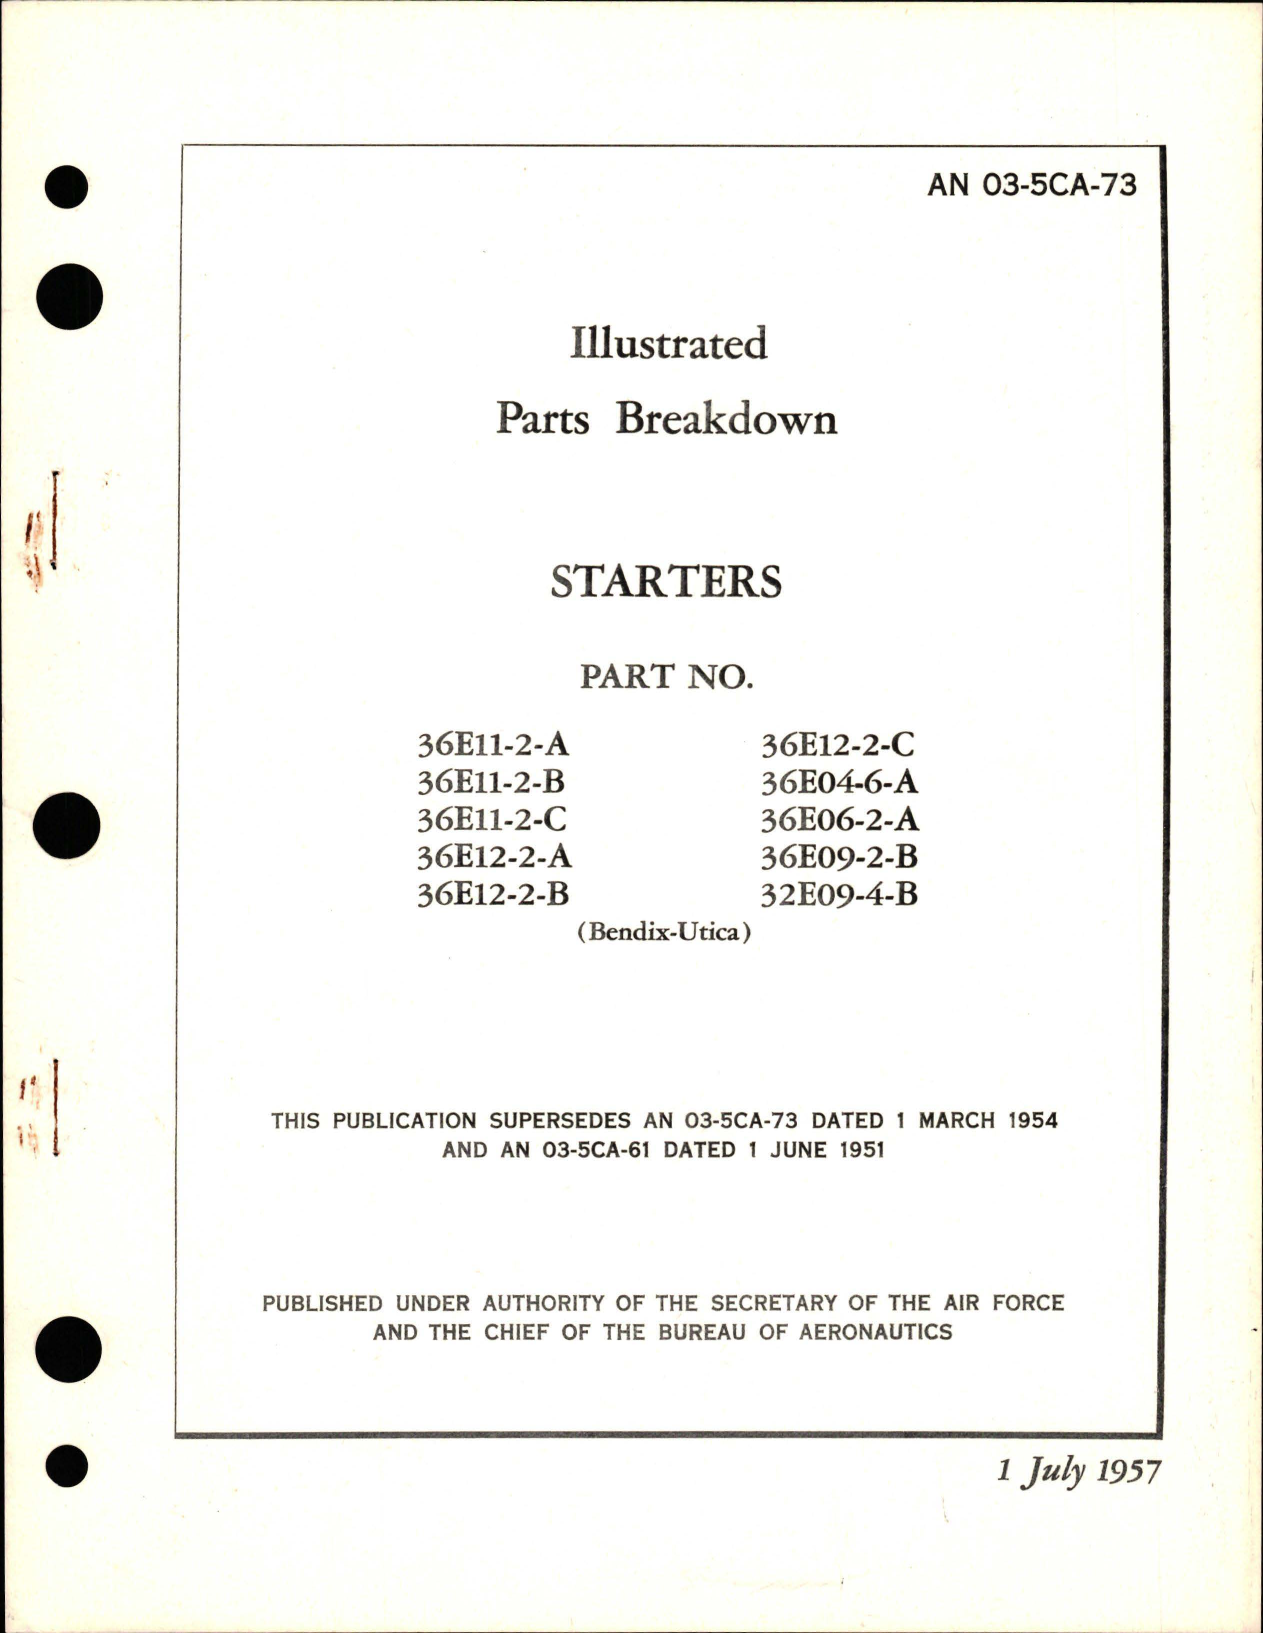 Sample page 1 from AirCorps Library document: Illustrated Parts Breakdown for Starters 